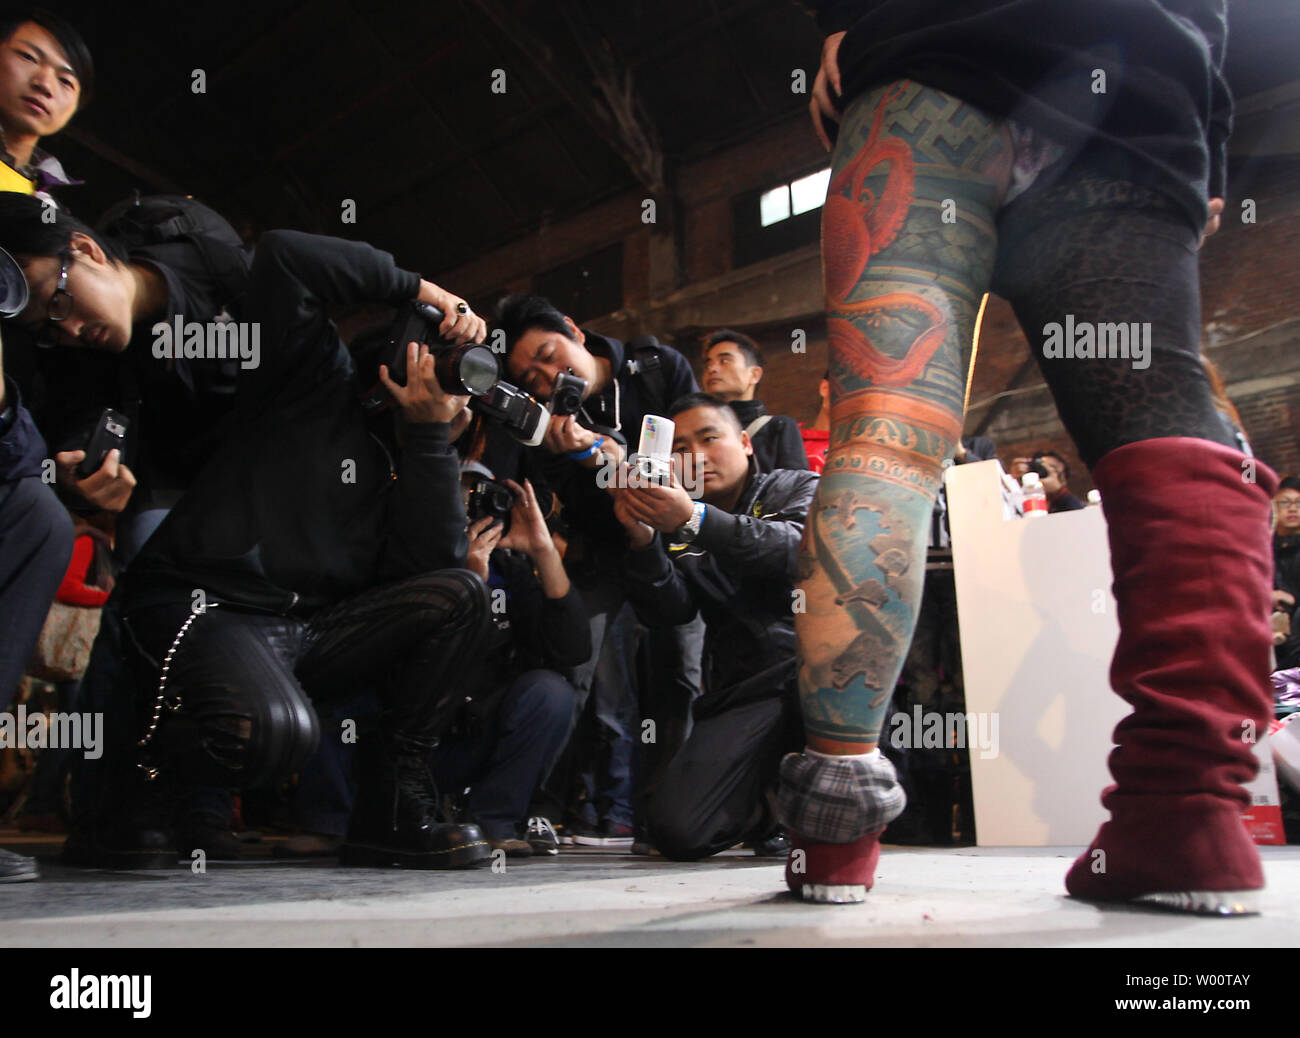 A heavily tattooed Chinese woman poses for photographers during the Beijing International Tattoo Convention being held in Beijing's 798 Art zone October 17, 2010.     UPI/Stephen Shaver Stock Photo